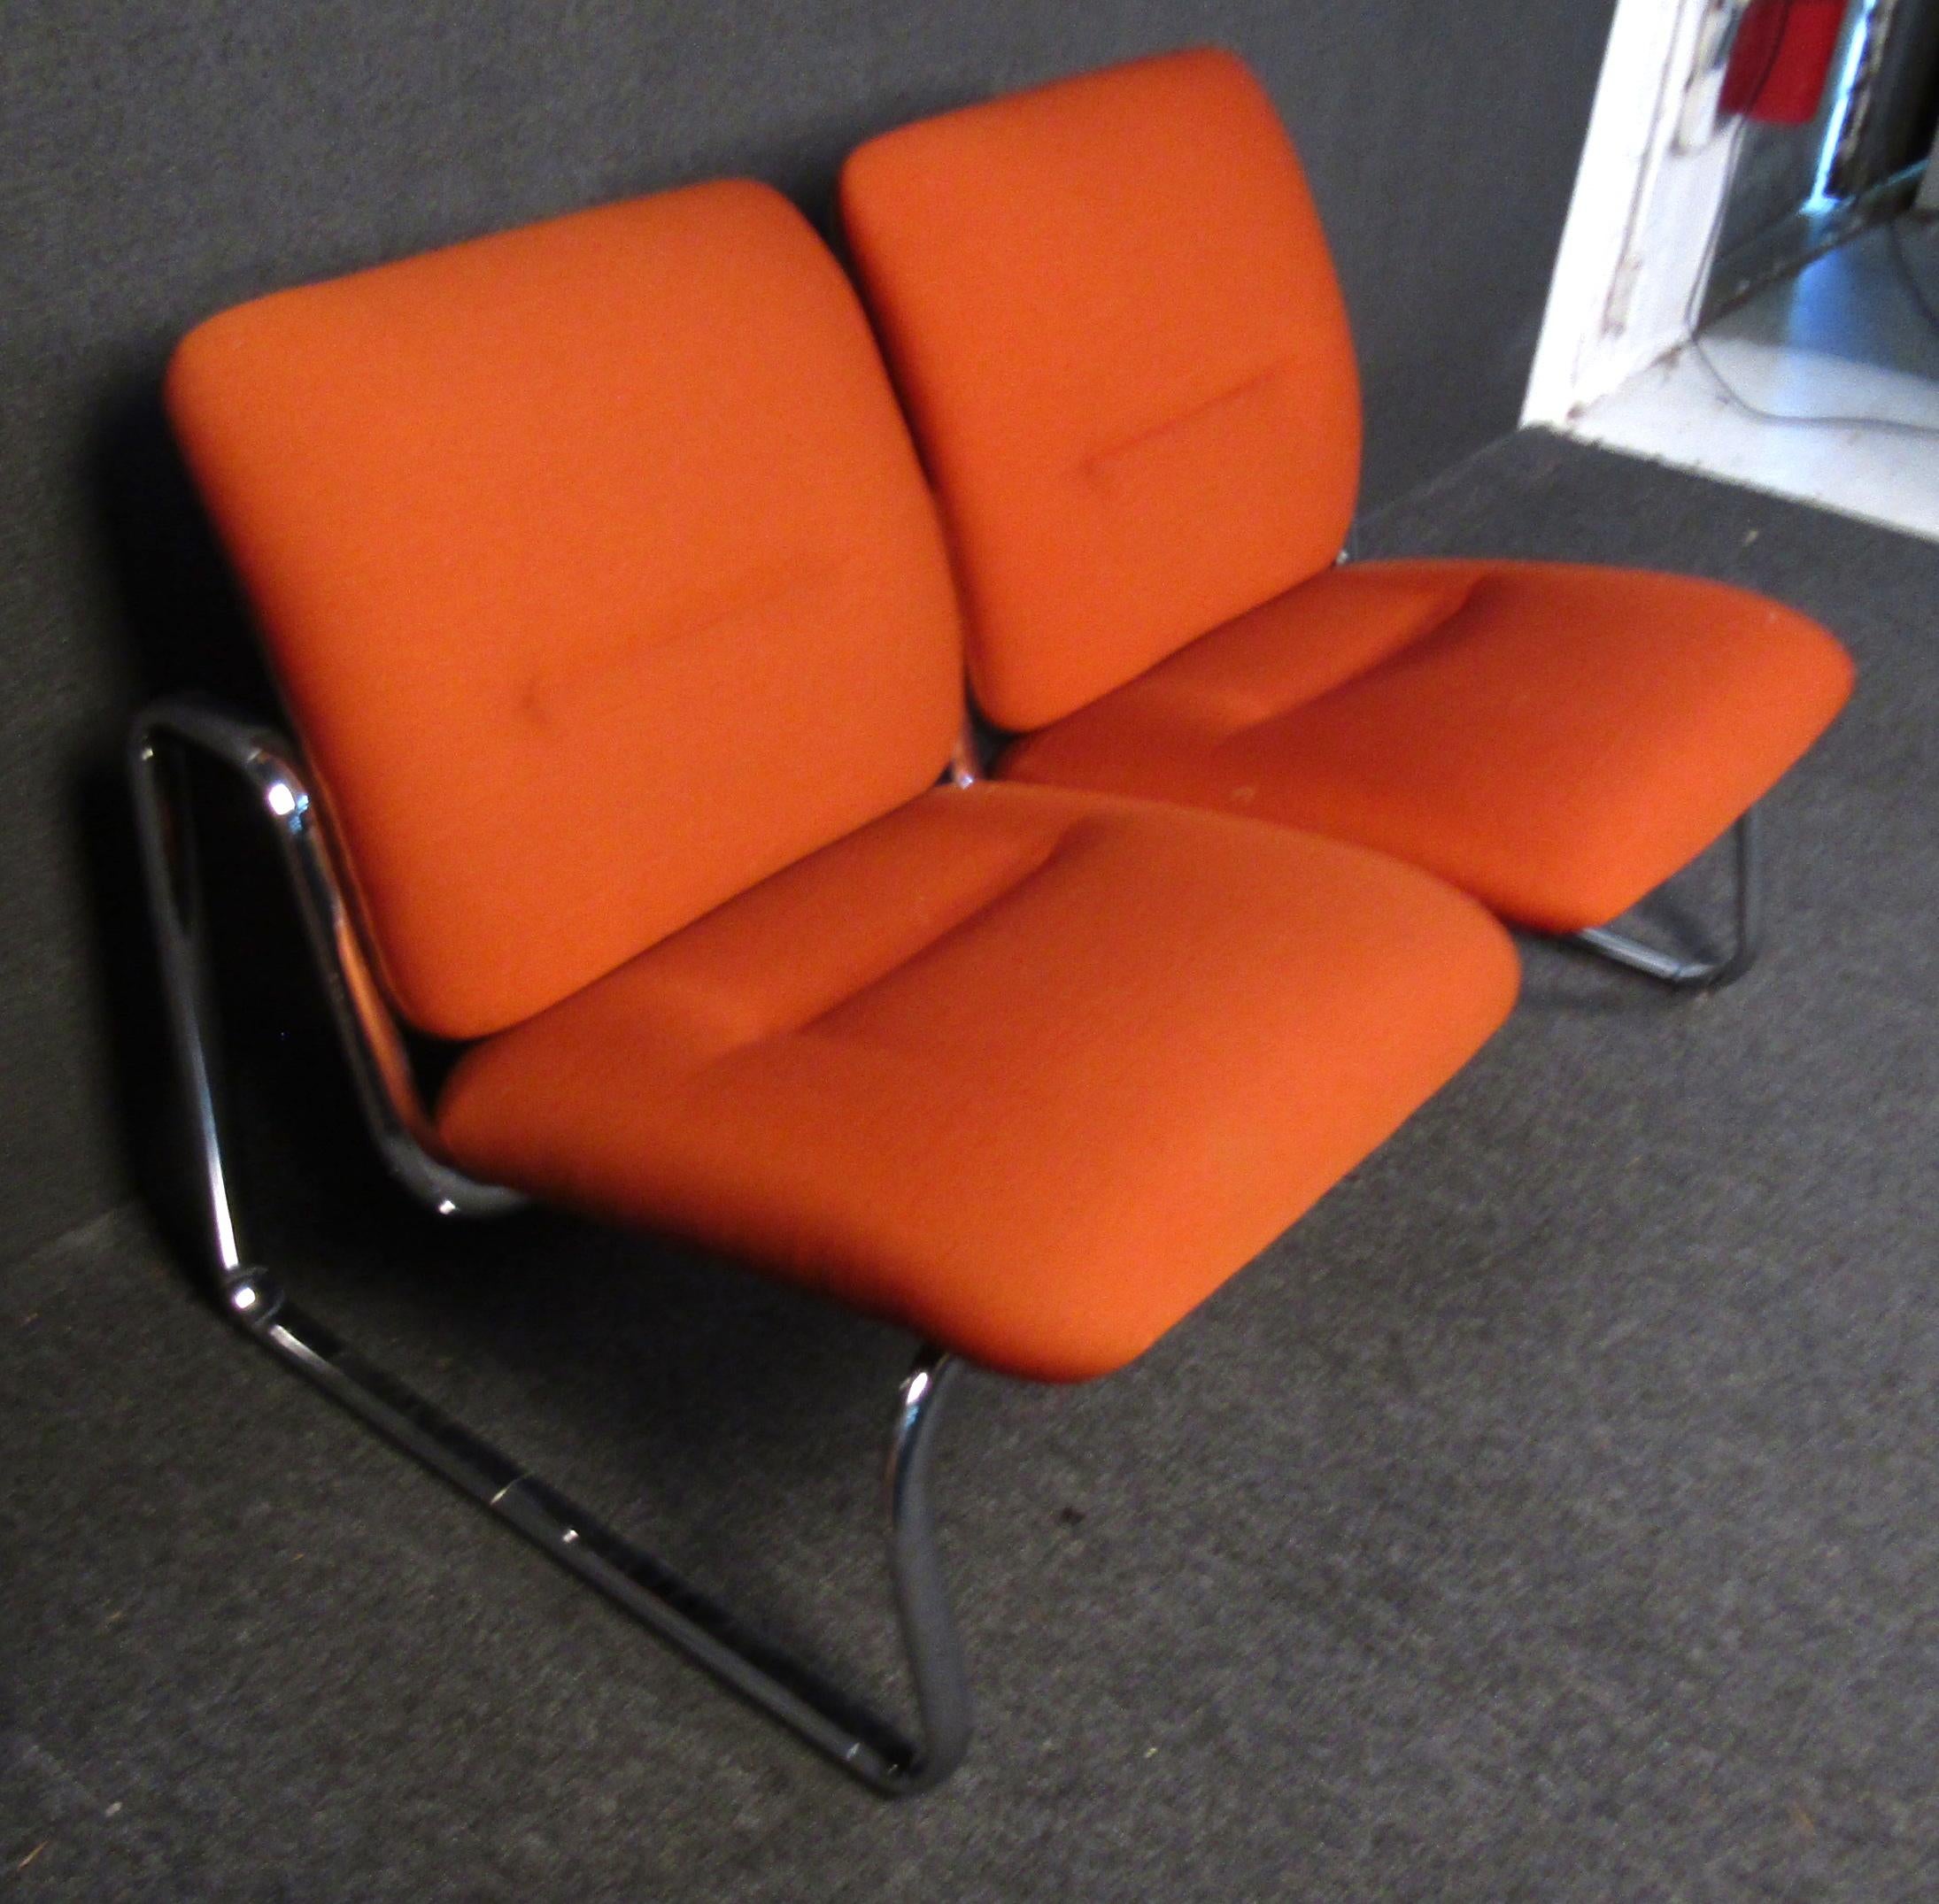 Beautiful vintage modern two seat bench/ loveseat. Upholstered in a beautiful vibrant orange fabric in amazing condition. The bench sits on sculptural bent chrome legs and has a molded plastic backing.

Please confirm item location (NY or NJ).